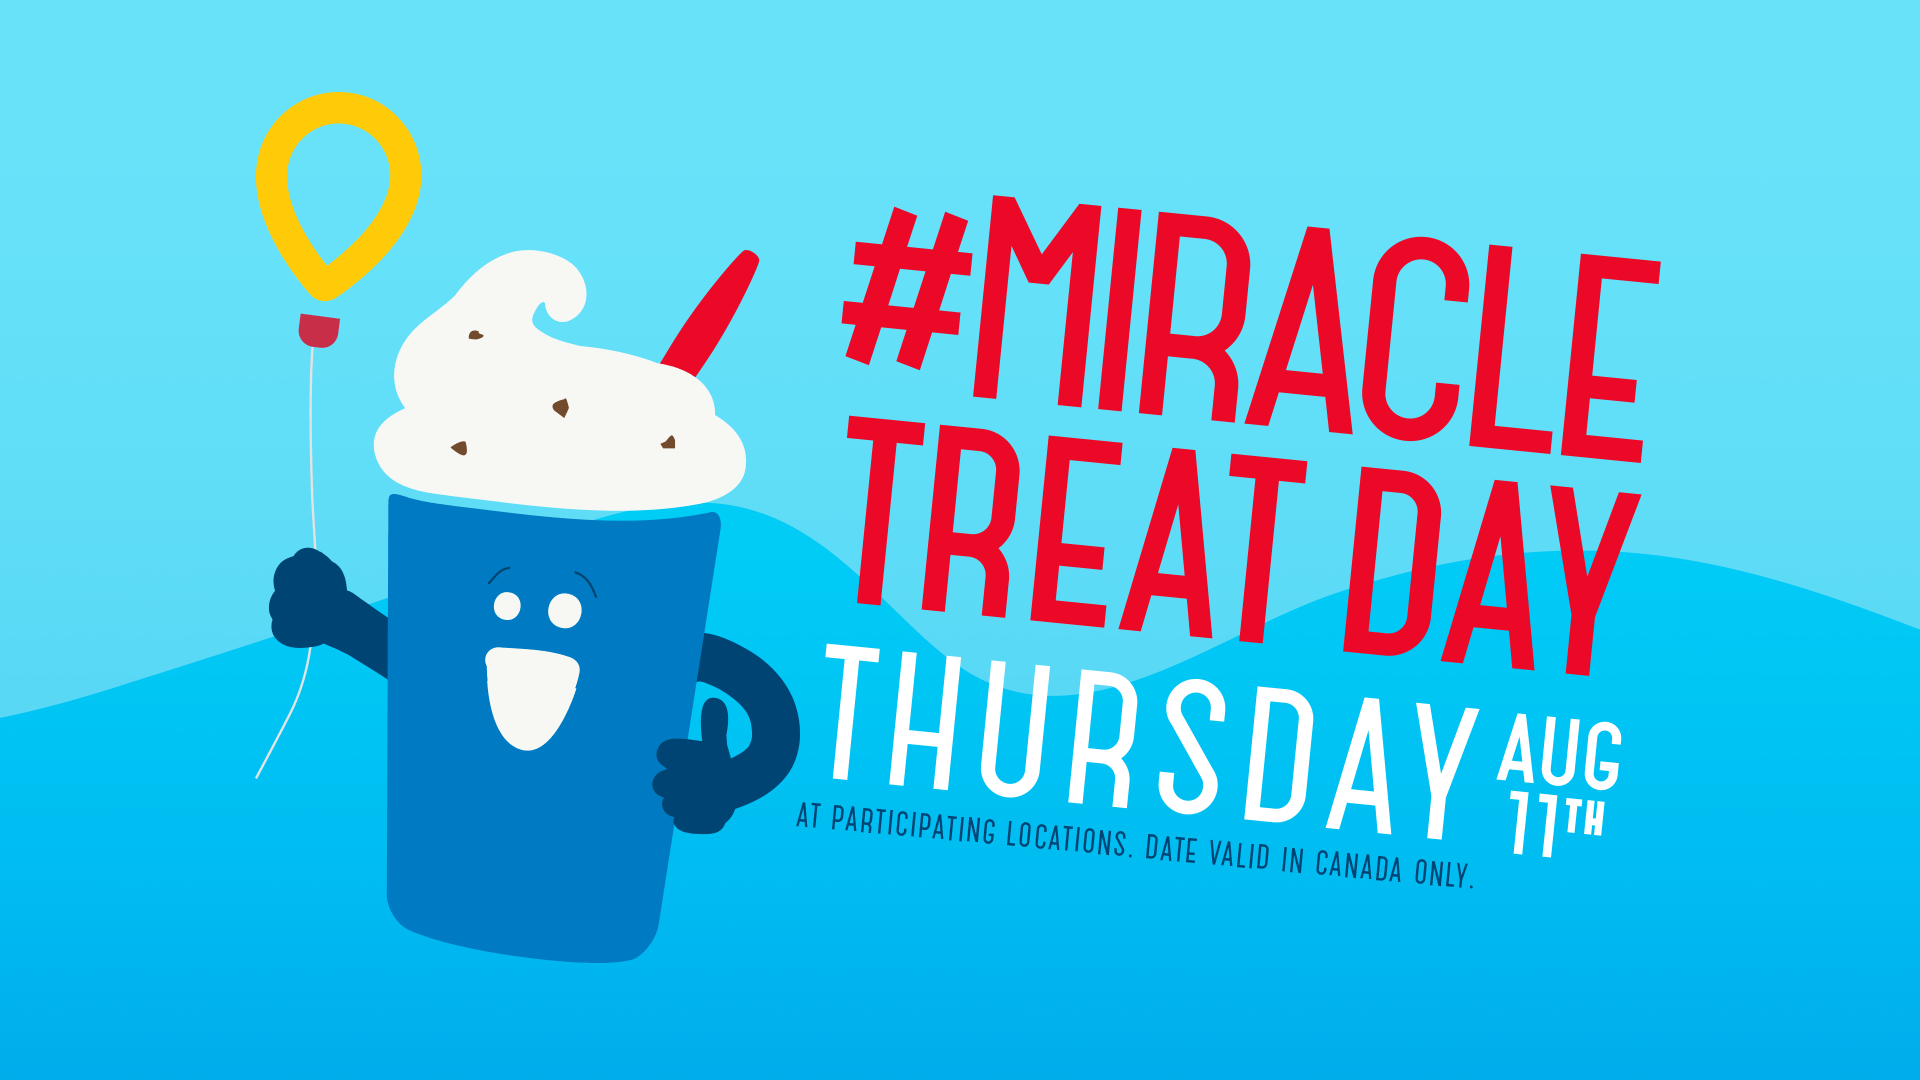 DQ Miracle Treat Day- August 11th